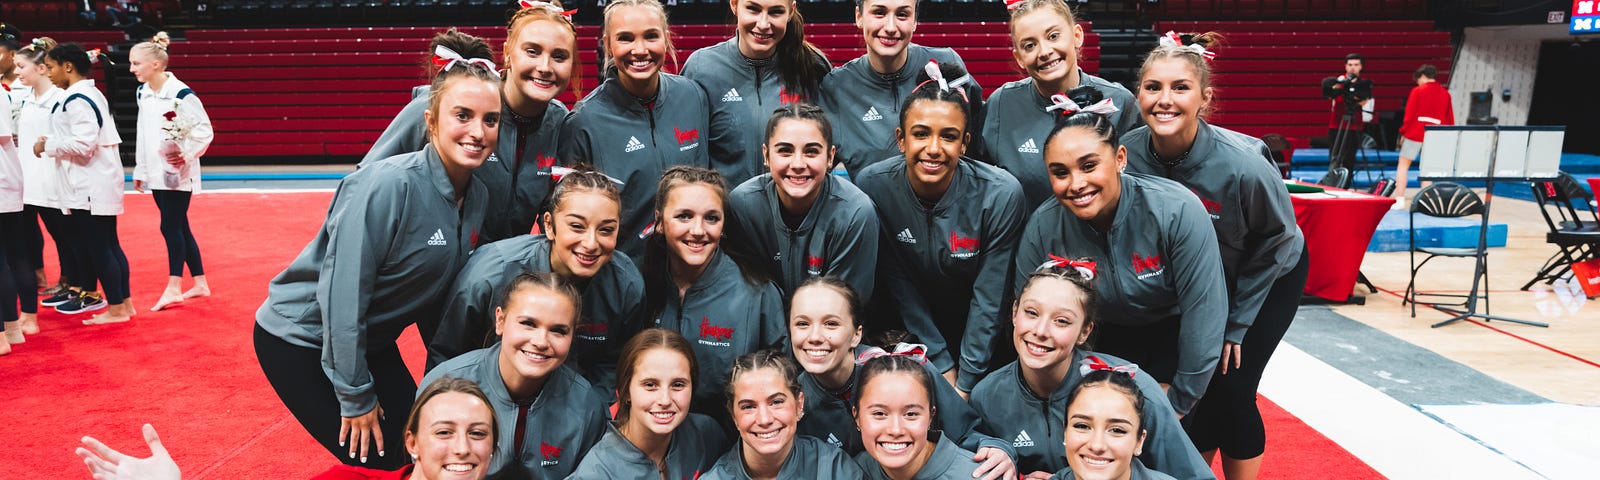 Charlotte smiles for a photo with the women’s gymnastics team